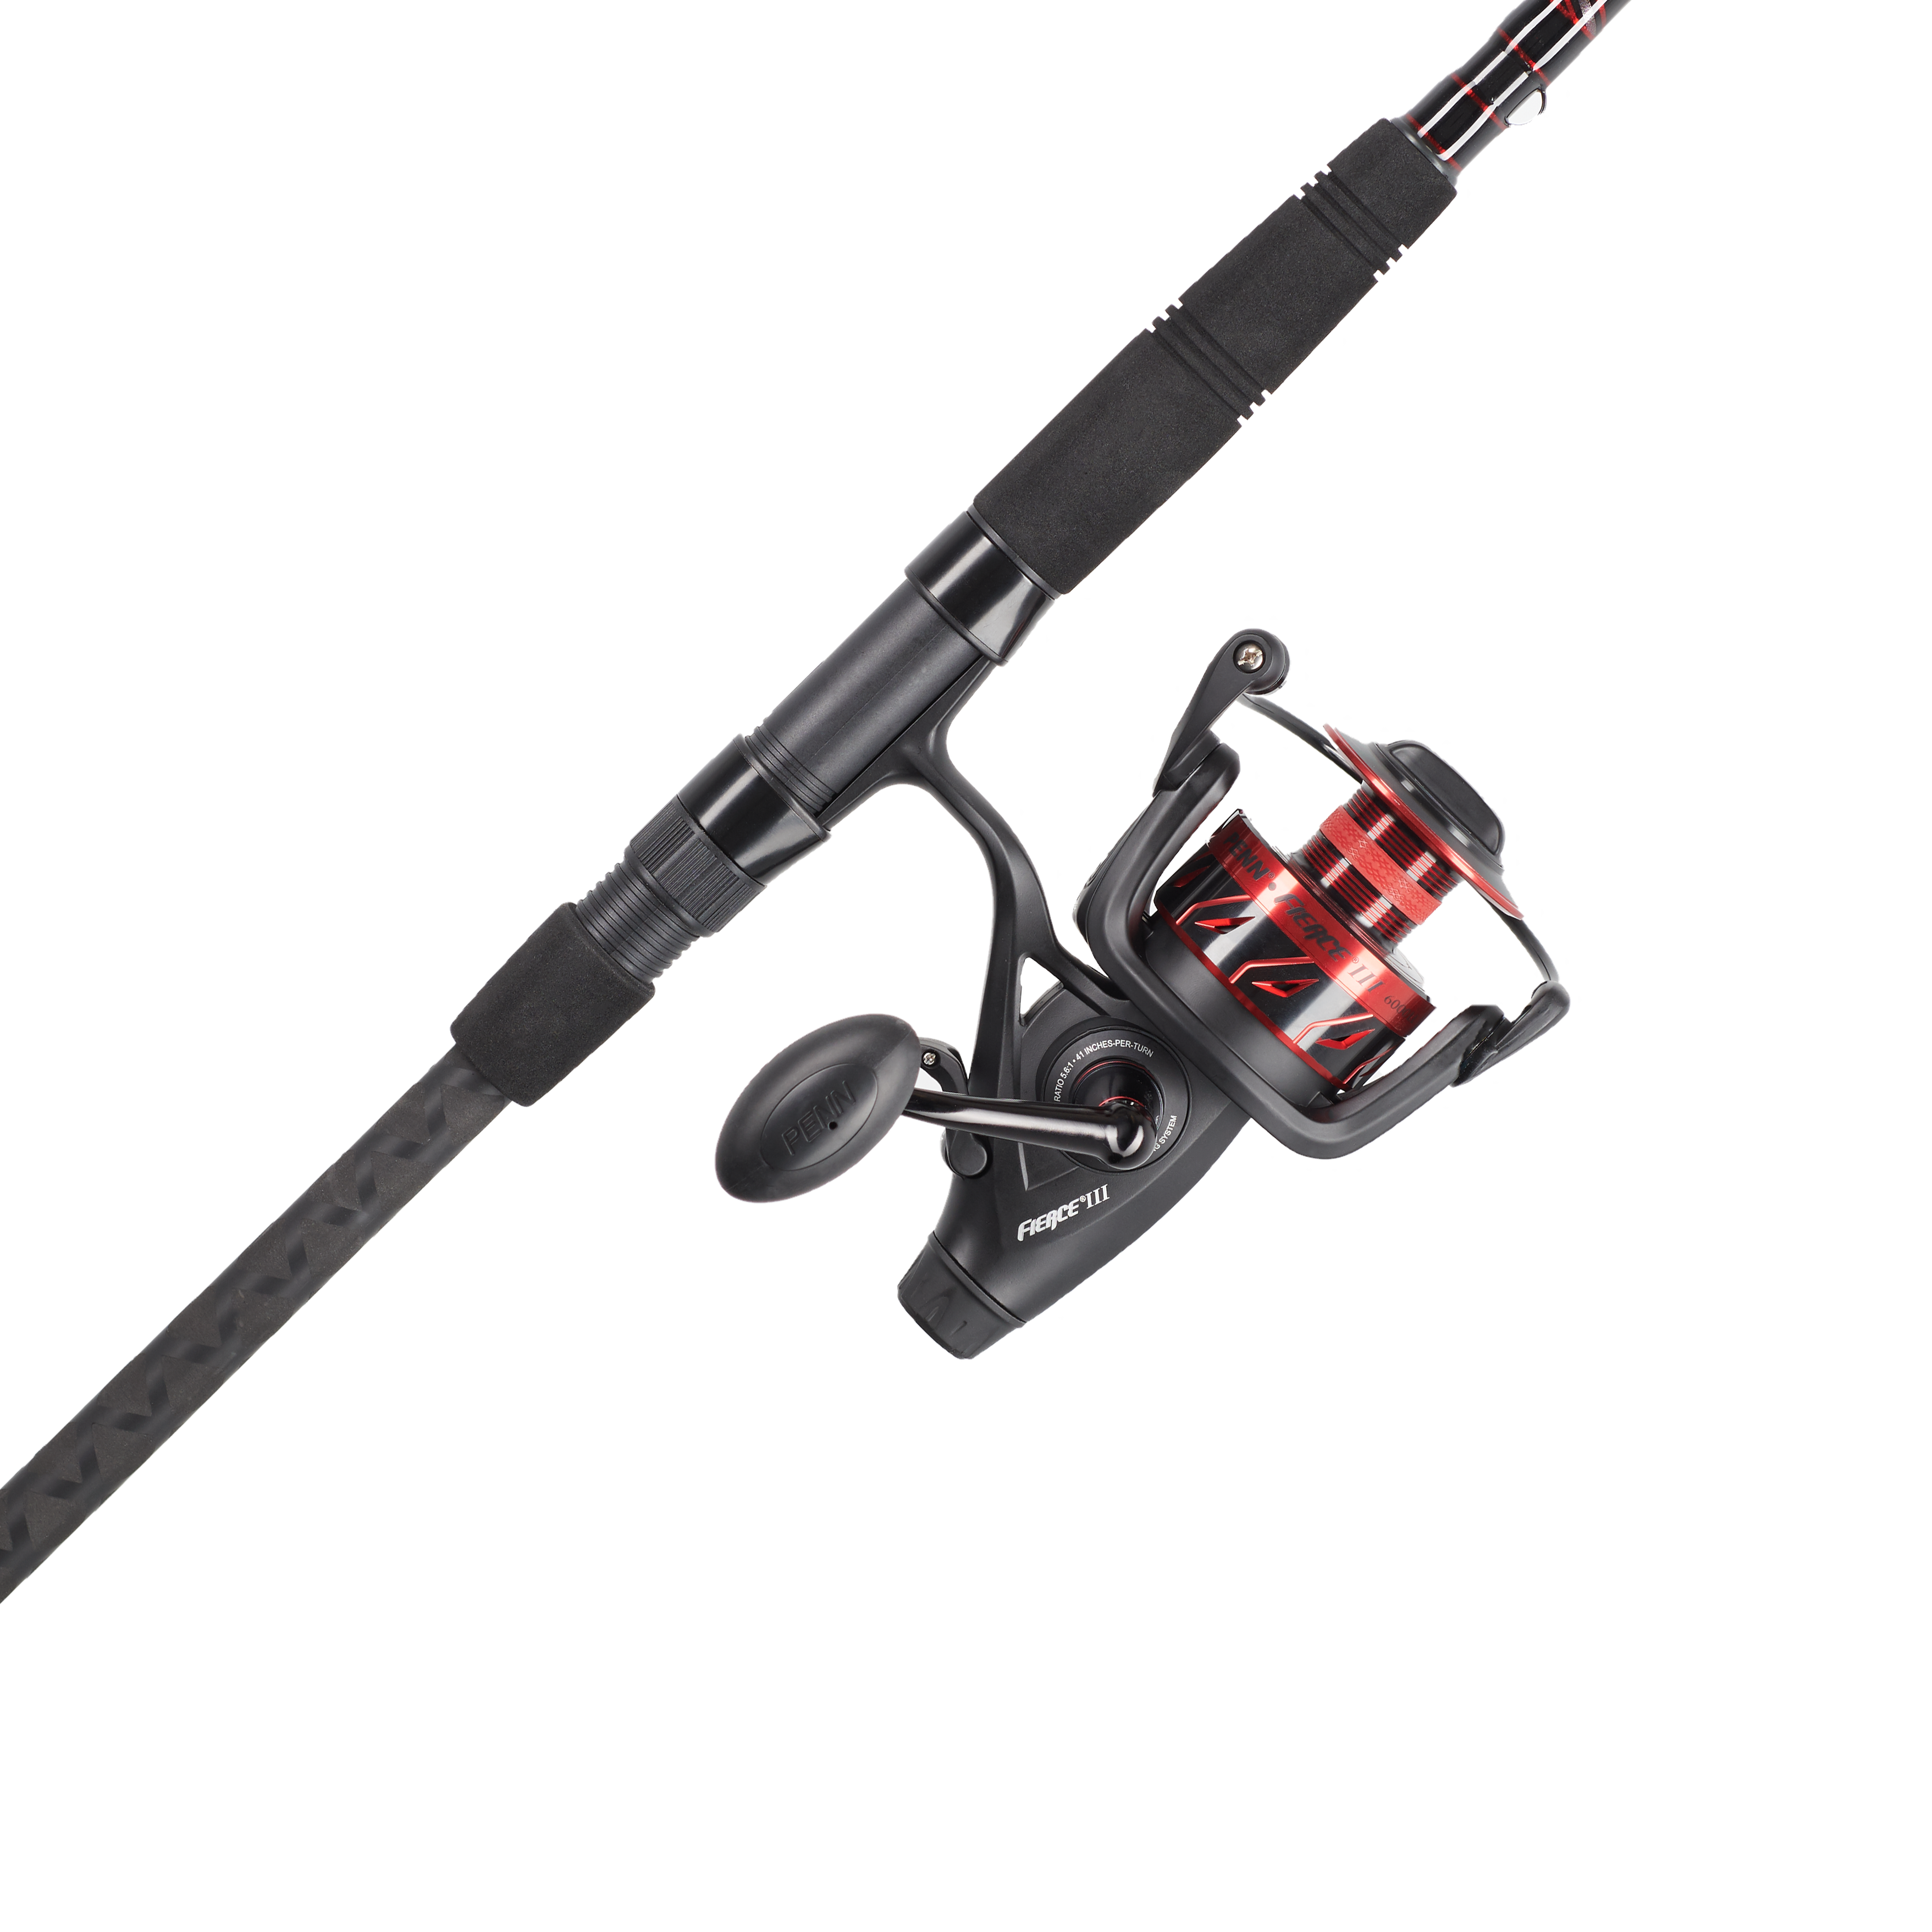 Details about   Penn Battle II Spinning Reel and Fishing Rod Combo 